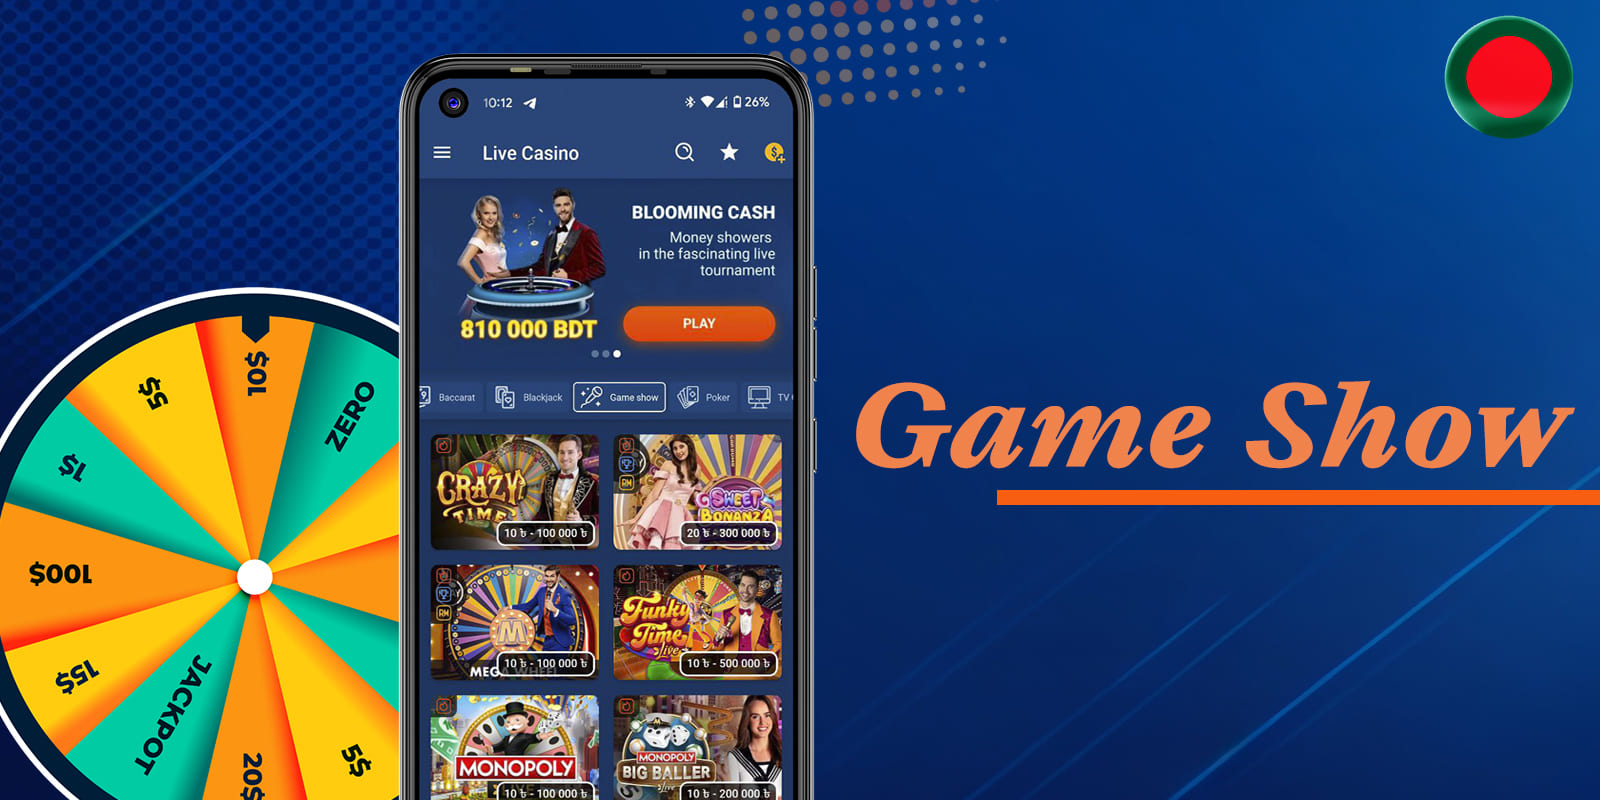 Various types of live games show on the Mostbet platform